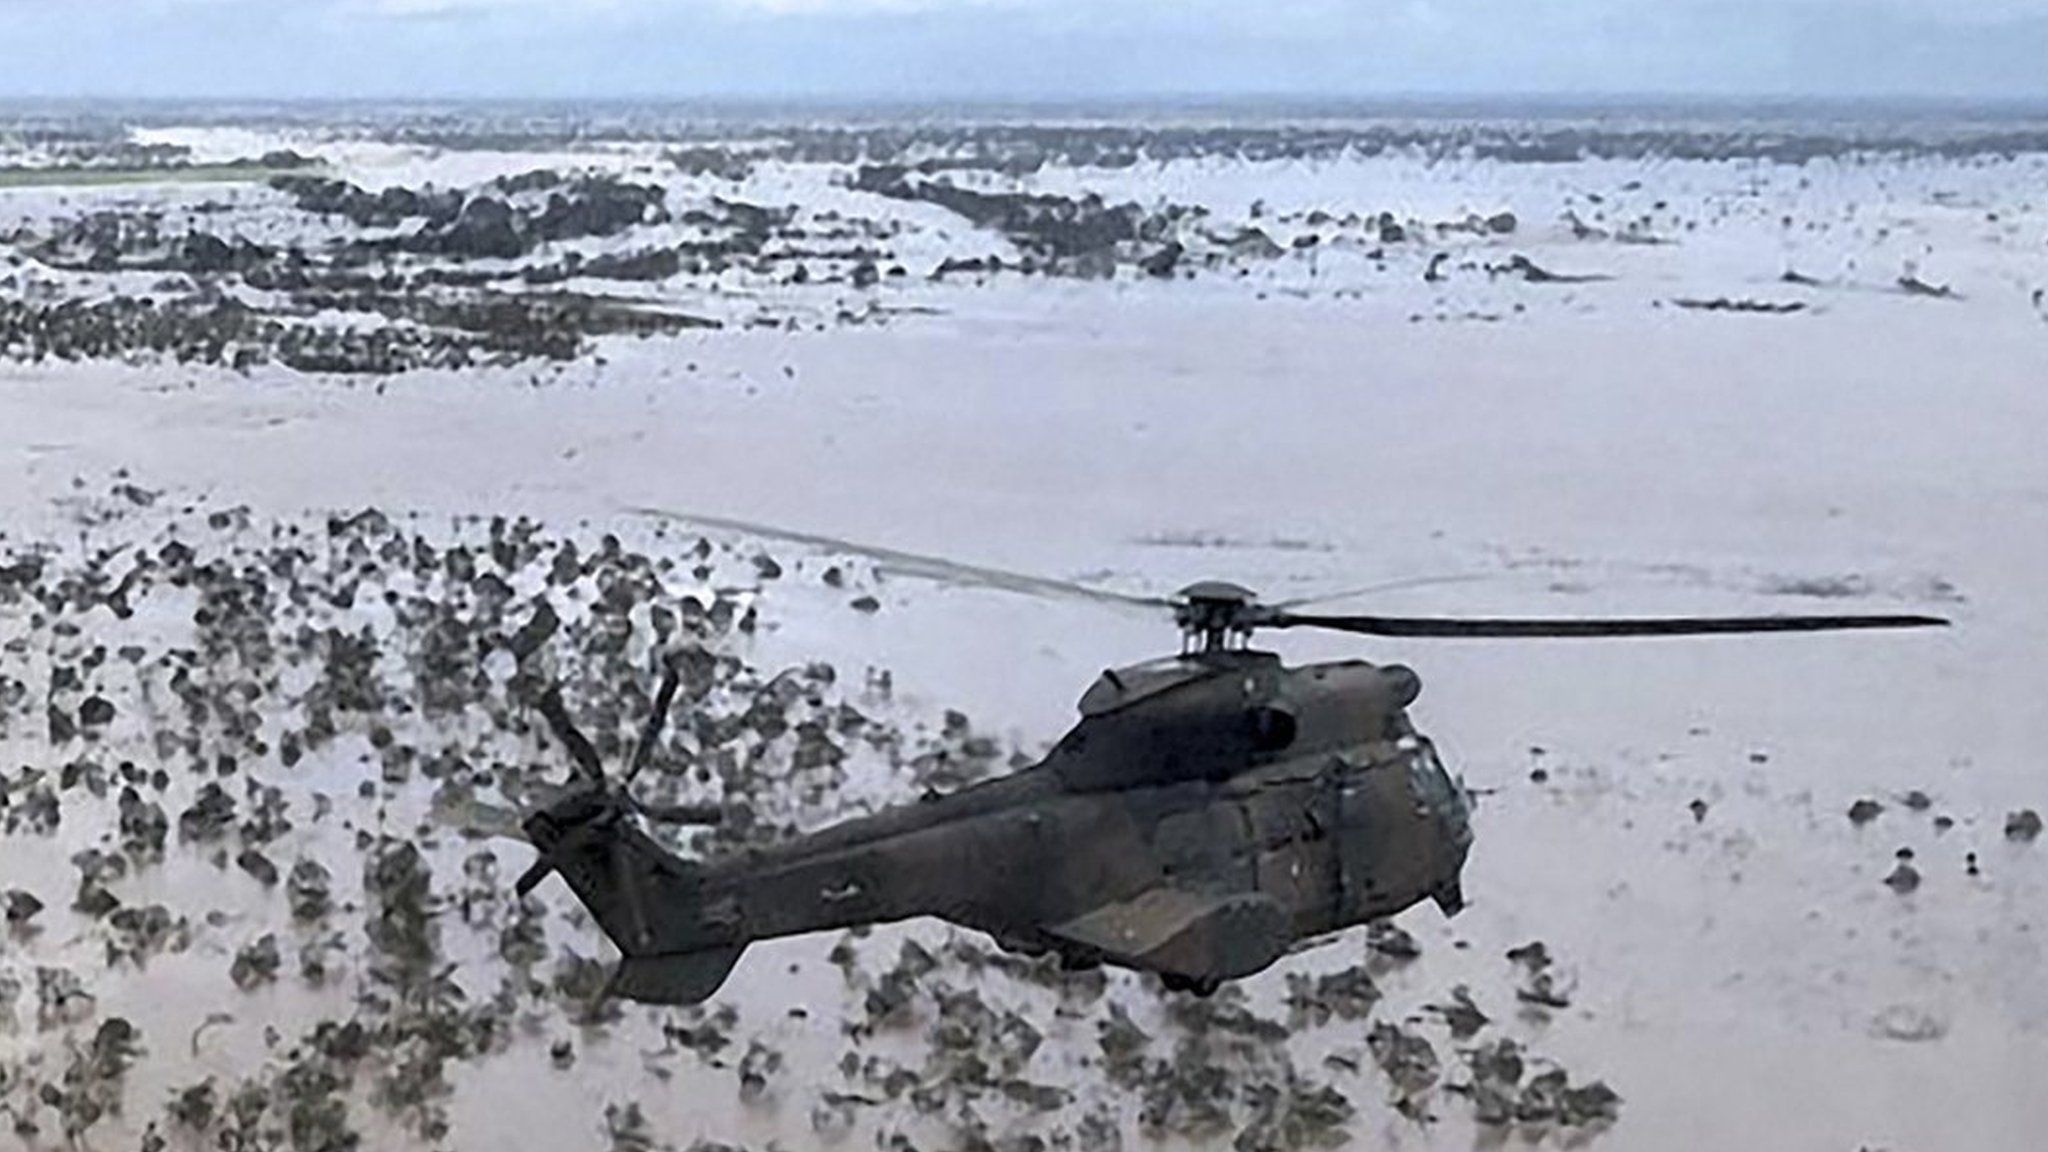 Helicopters over cyclone-hit plains, Mozambique